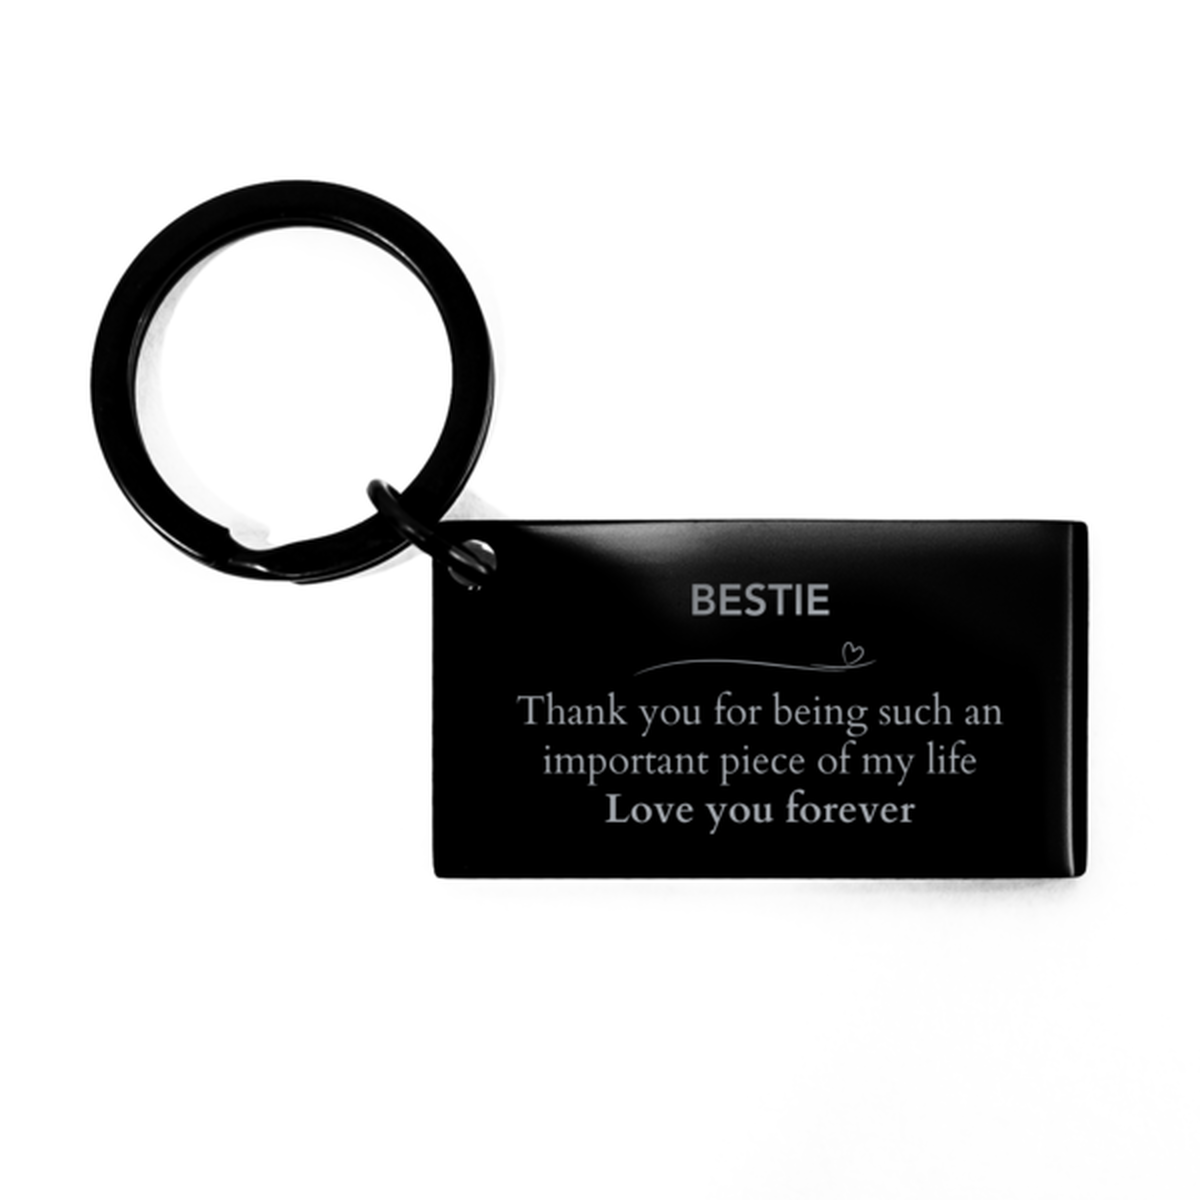 Appropriate Bestie Keychain Epic Birthday Gifts for Bestie Thank you for being such an important piece of my life Bestie Christmas Mothers Fathers Day